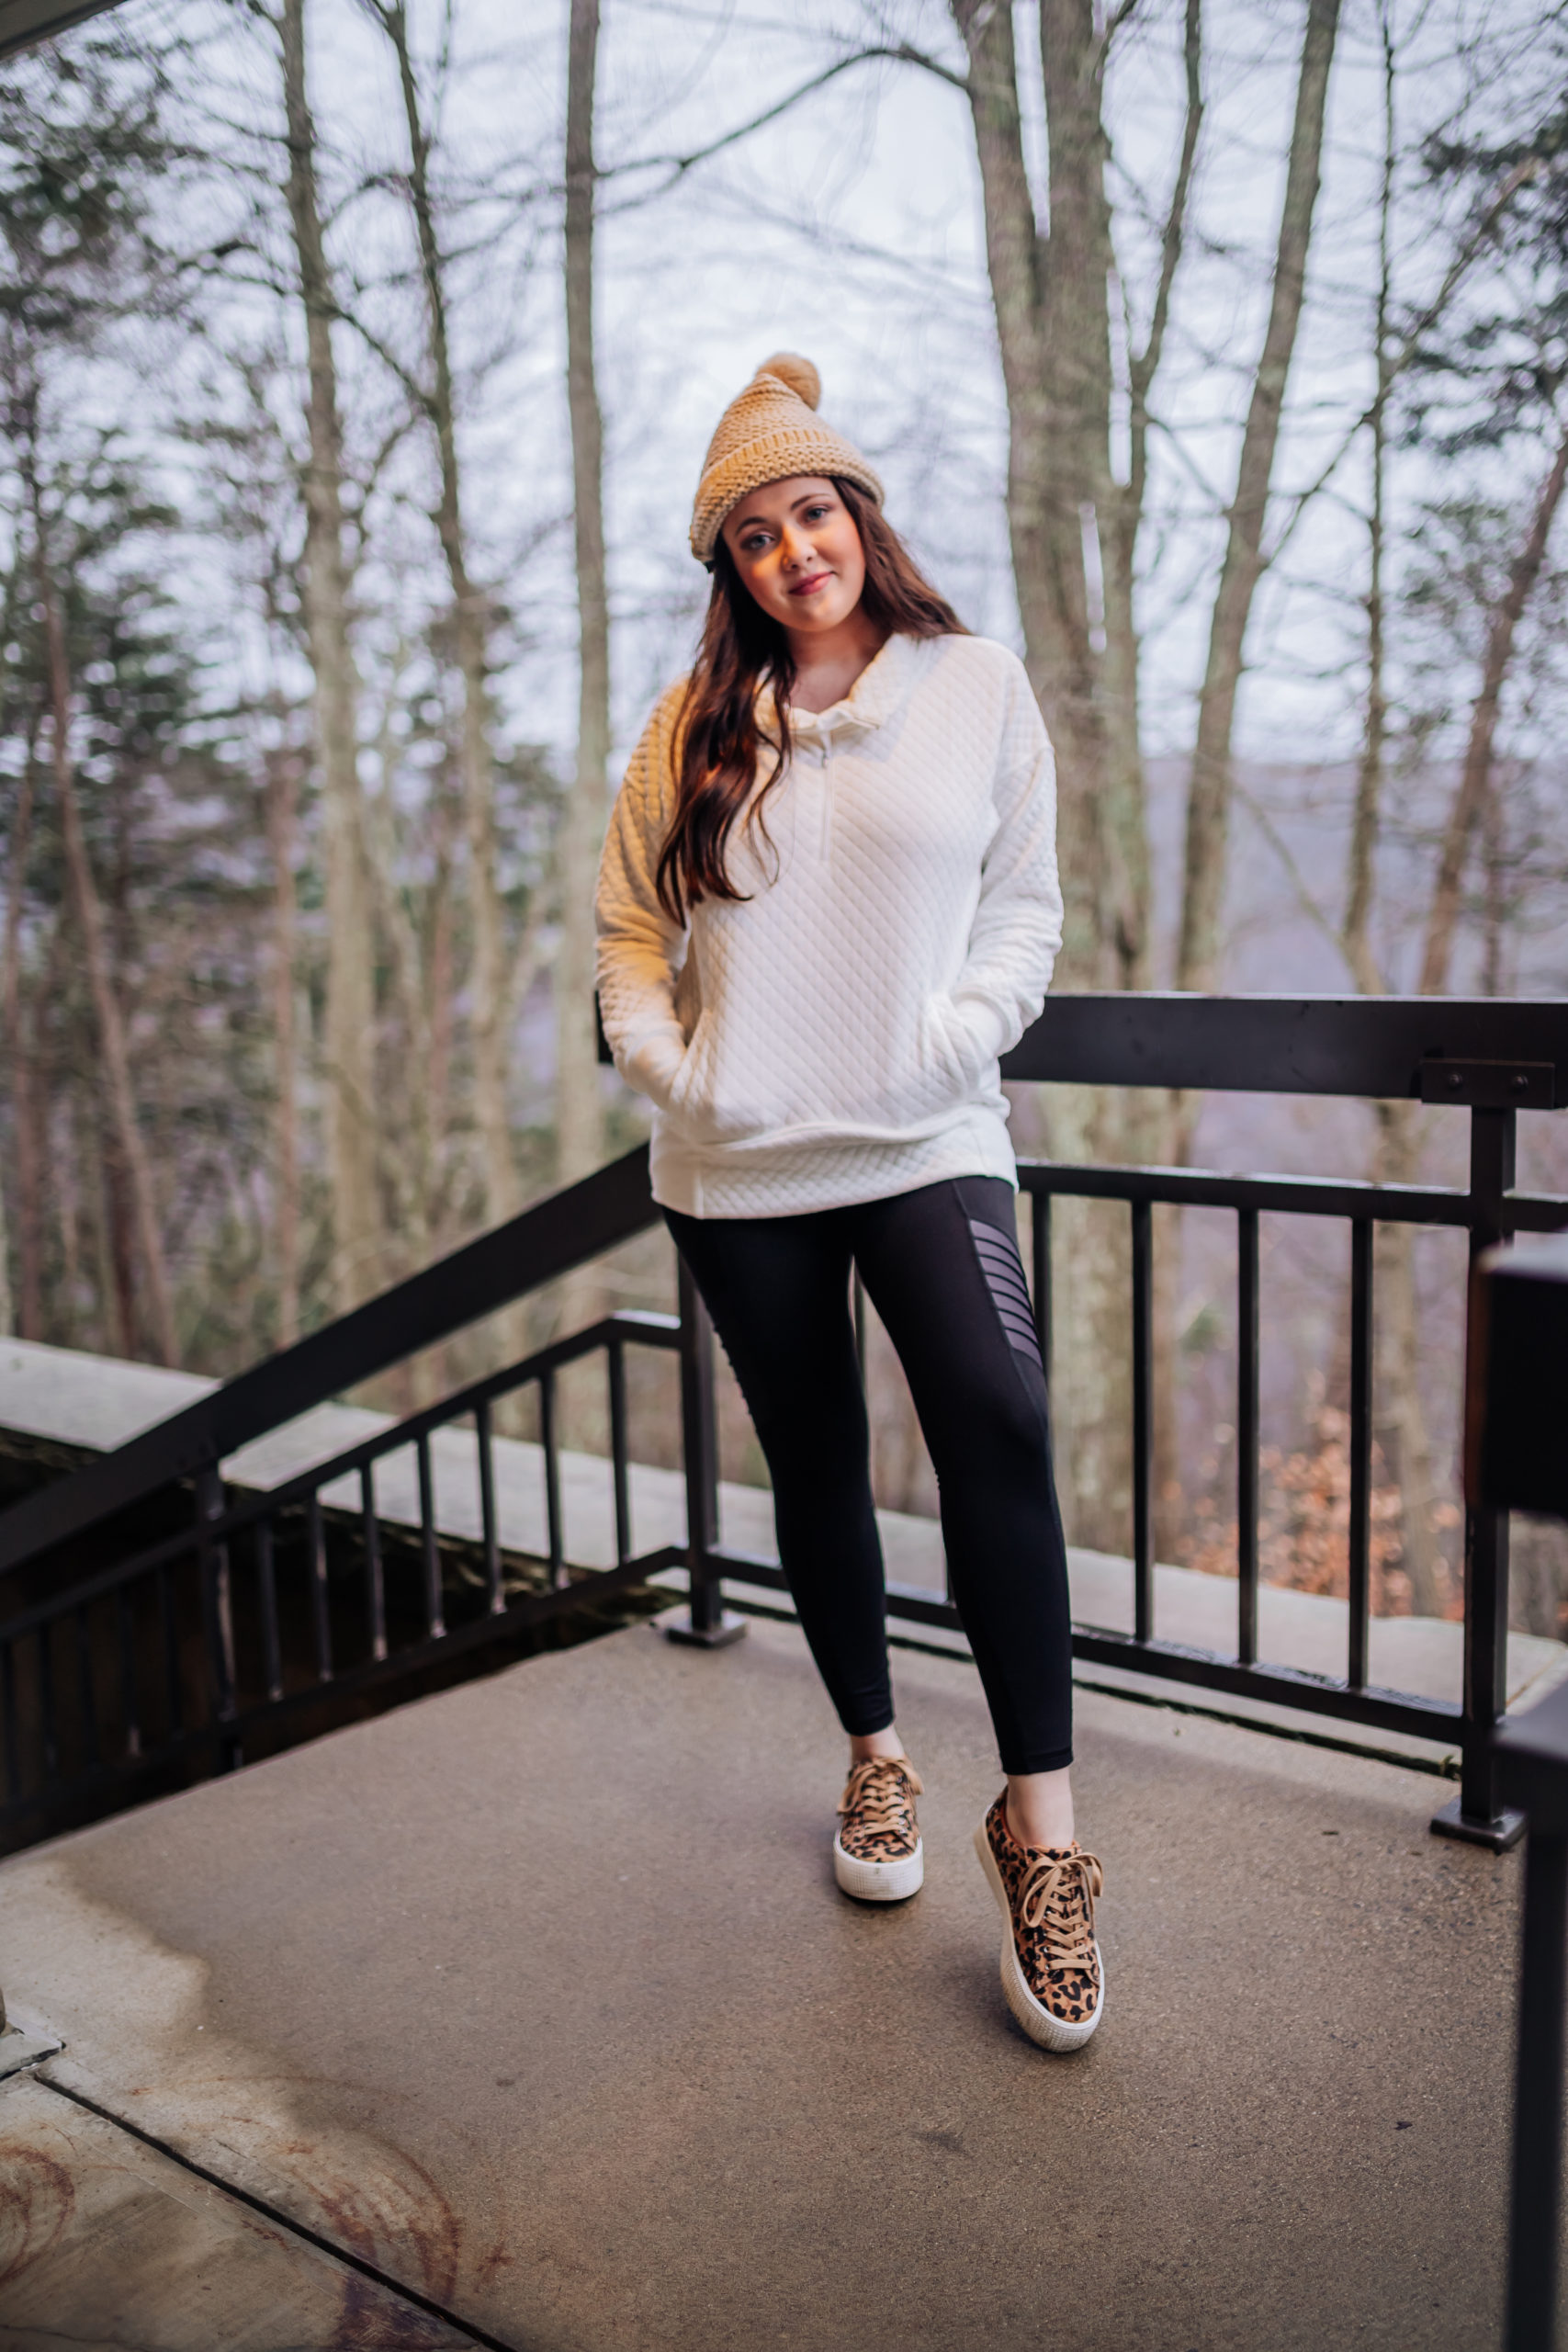 Chic, Sporty Look In The Mountains Of West Virginia